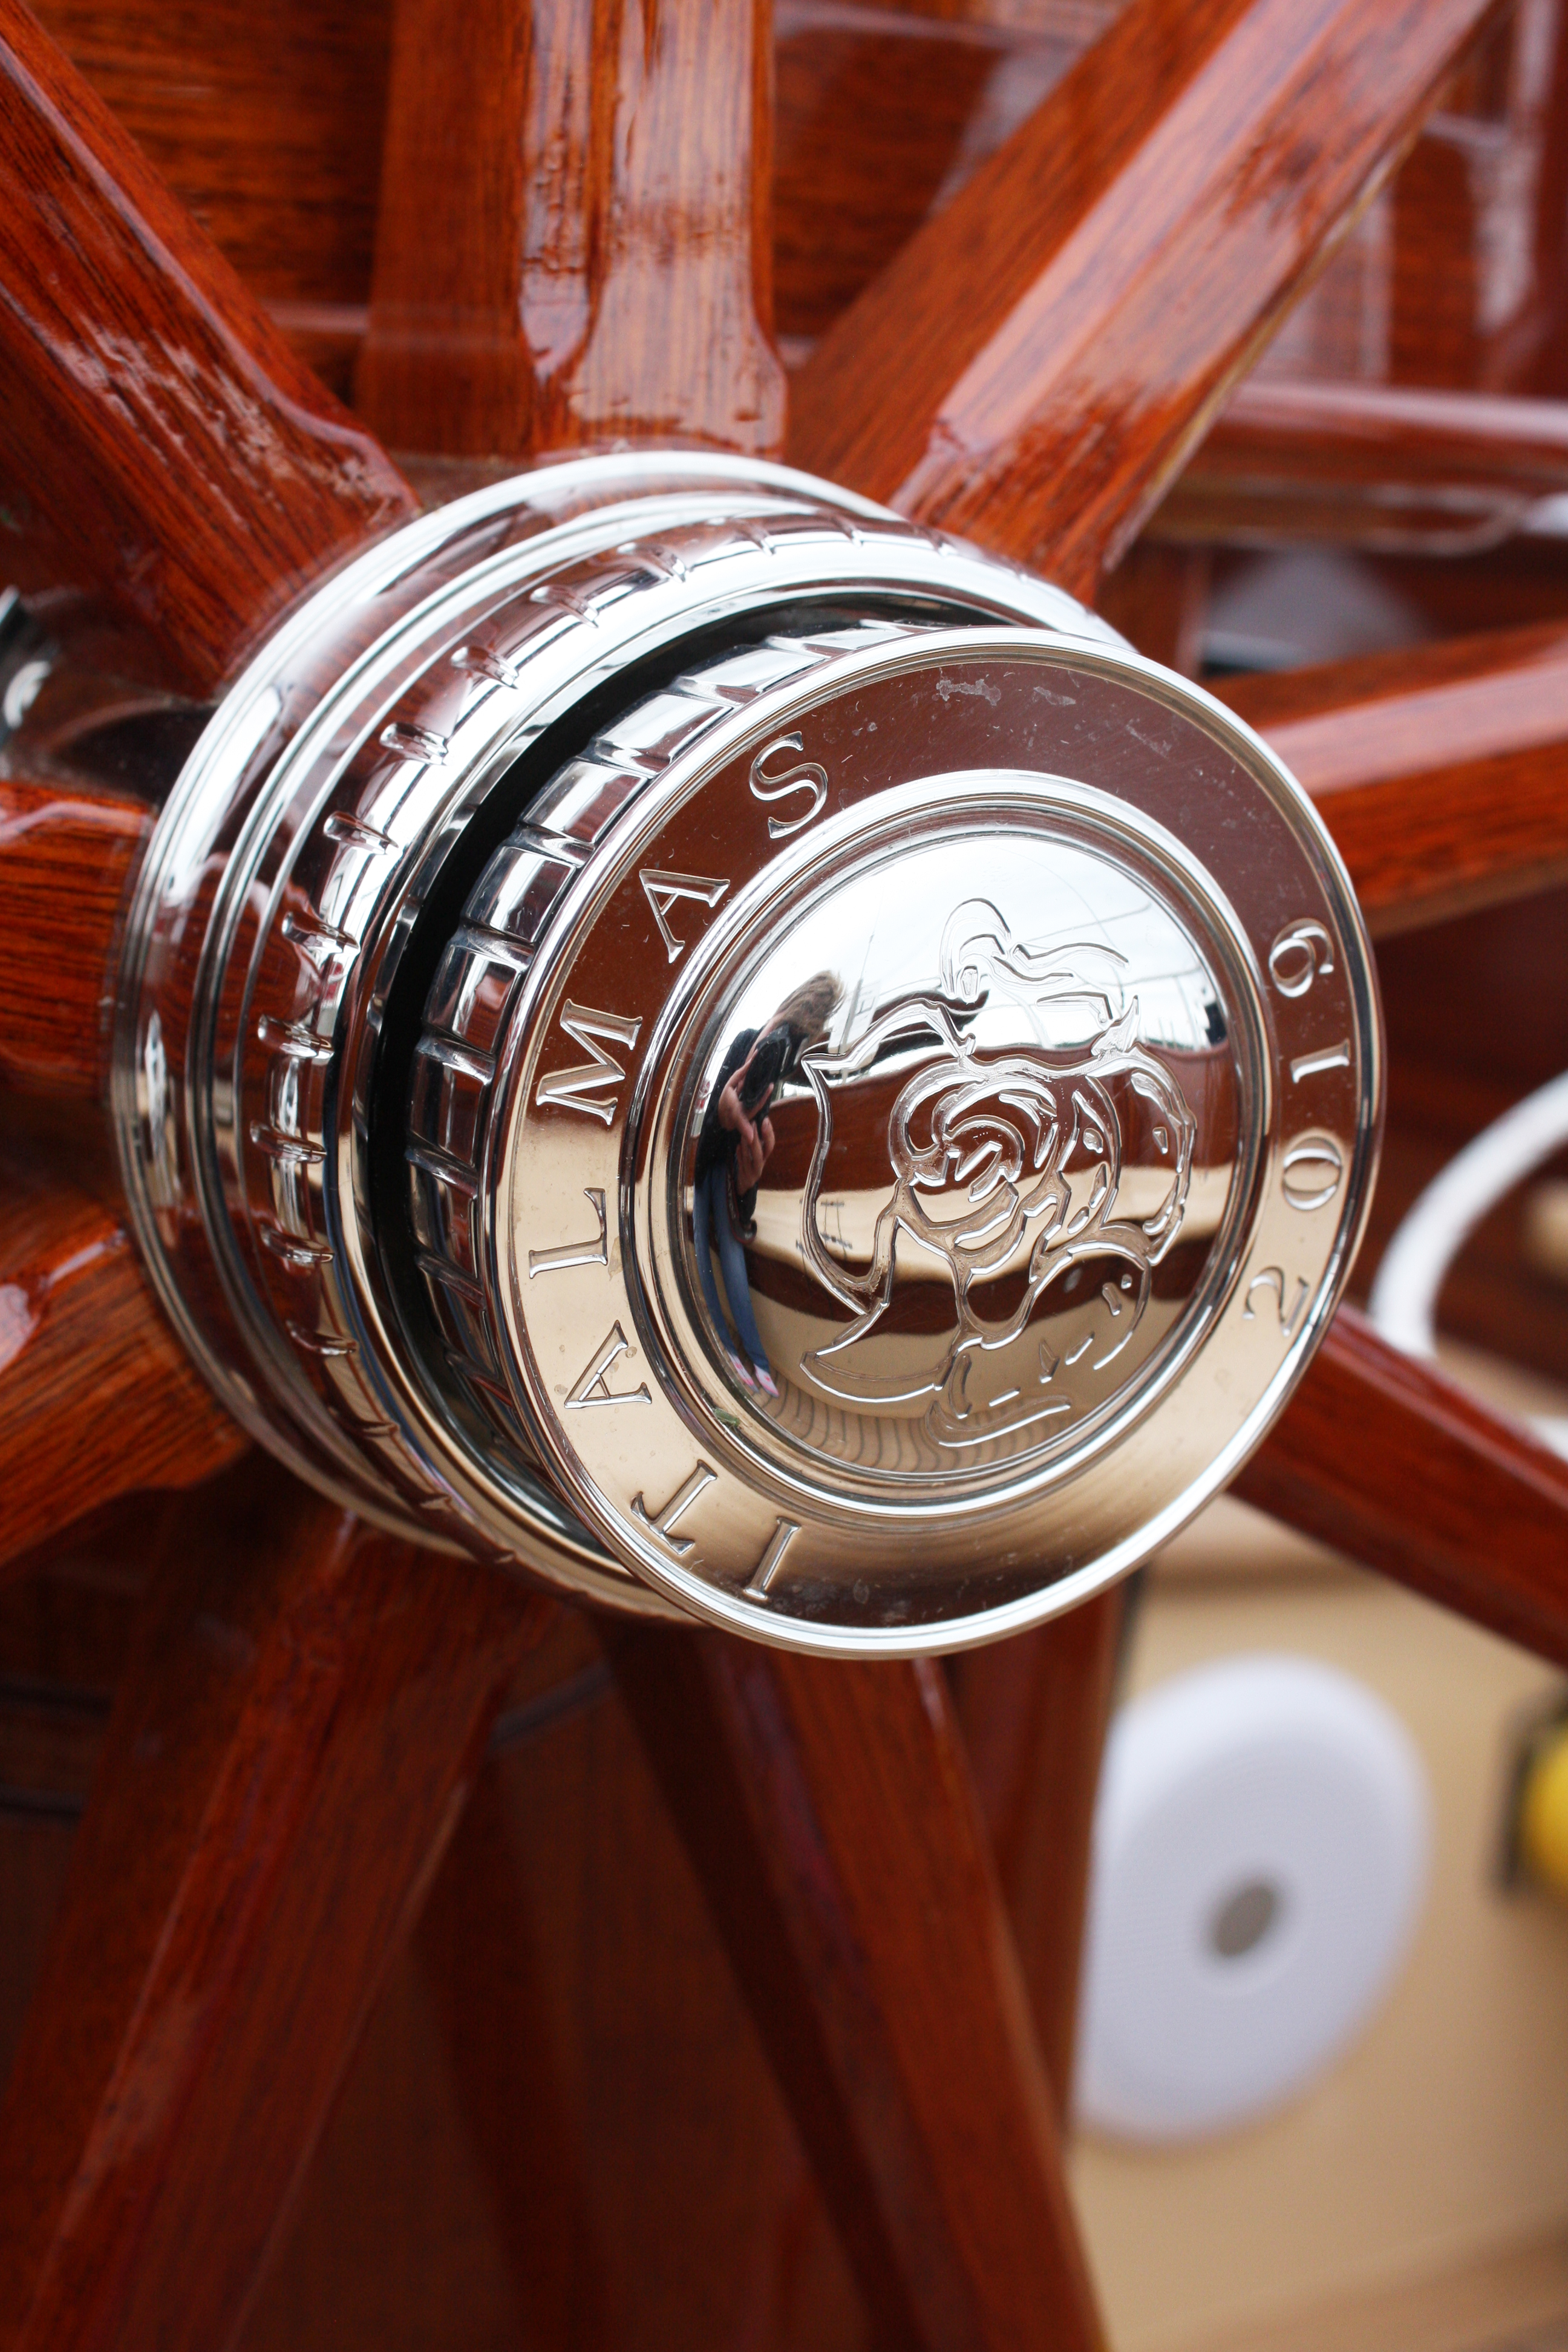 Engraved steering wheel facet with Russian rose